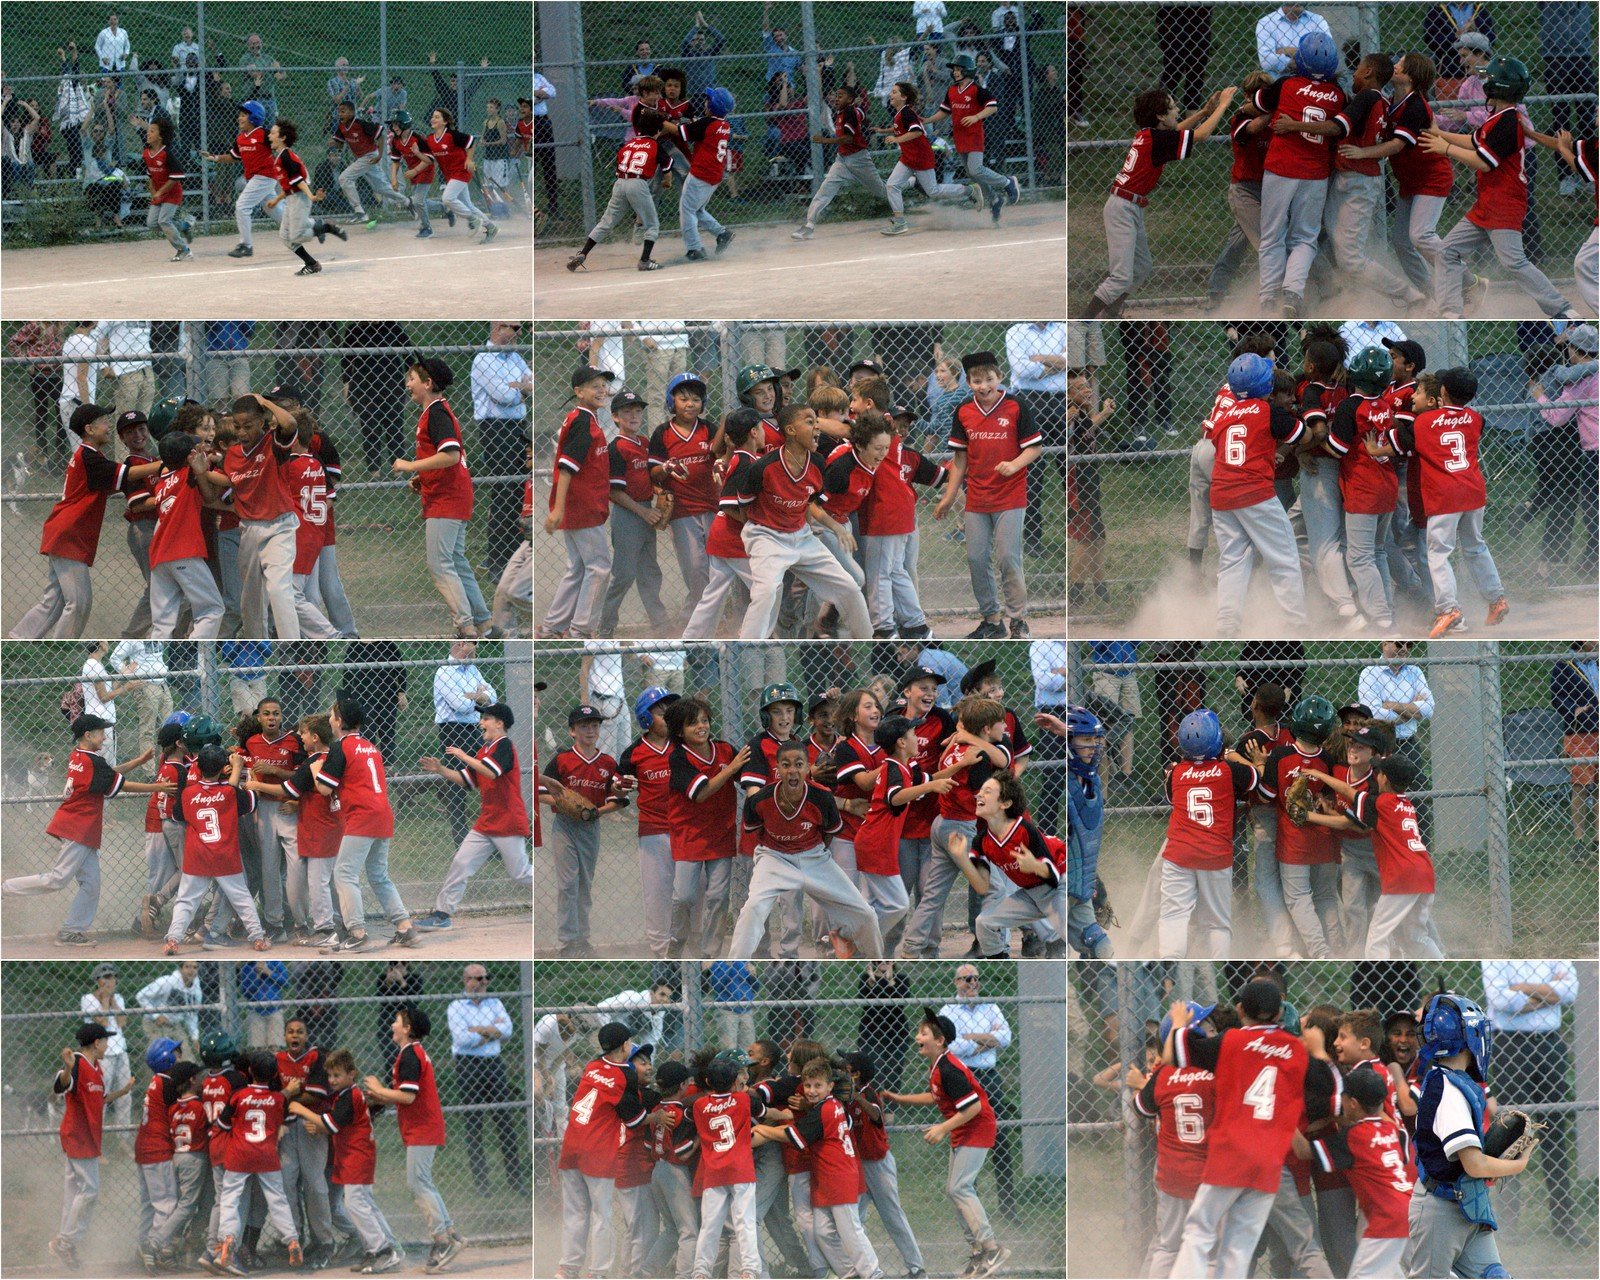 After Devon (7) came home with the winning run, the Angels rushed out onto the field to celebrate their Mosquito Division Championship Game victory at Christie Pits Diamond 2.